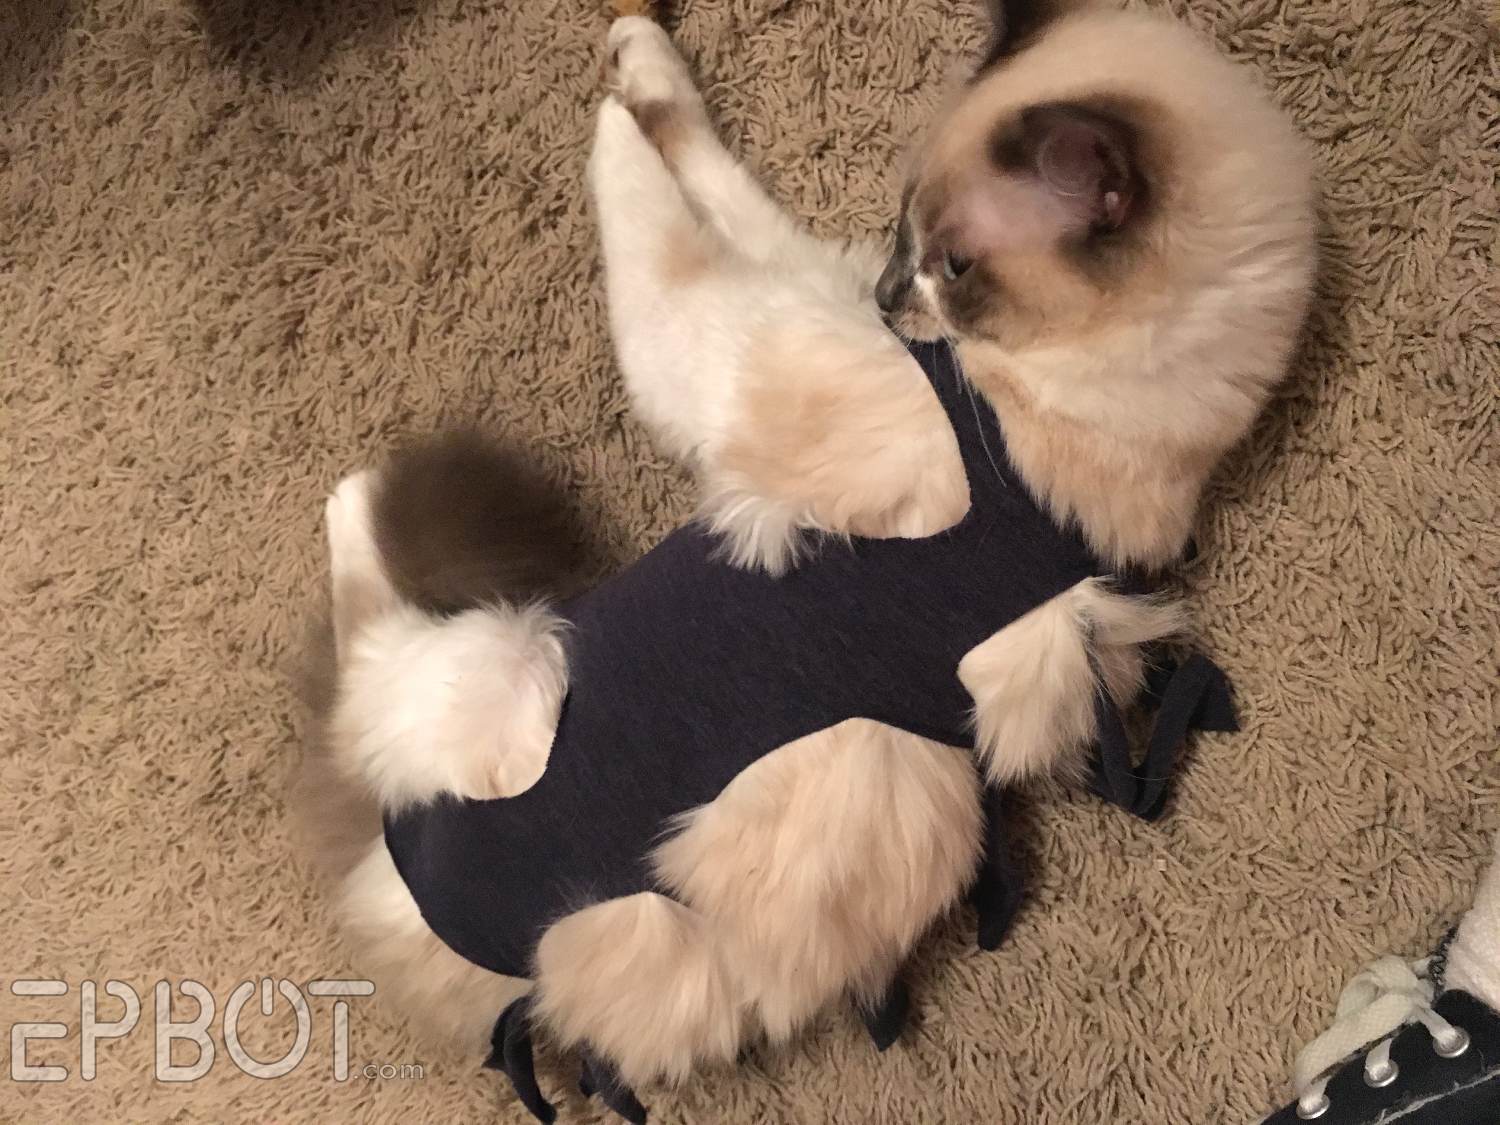 16 Cats wearing clothes ideas  cats, crazy cats, cats and kittens